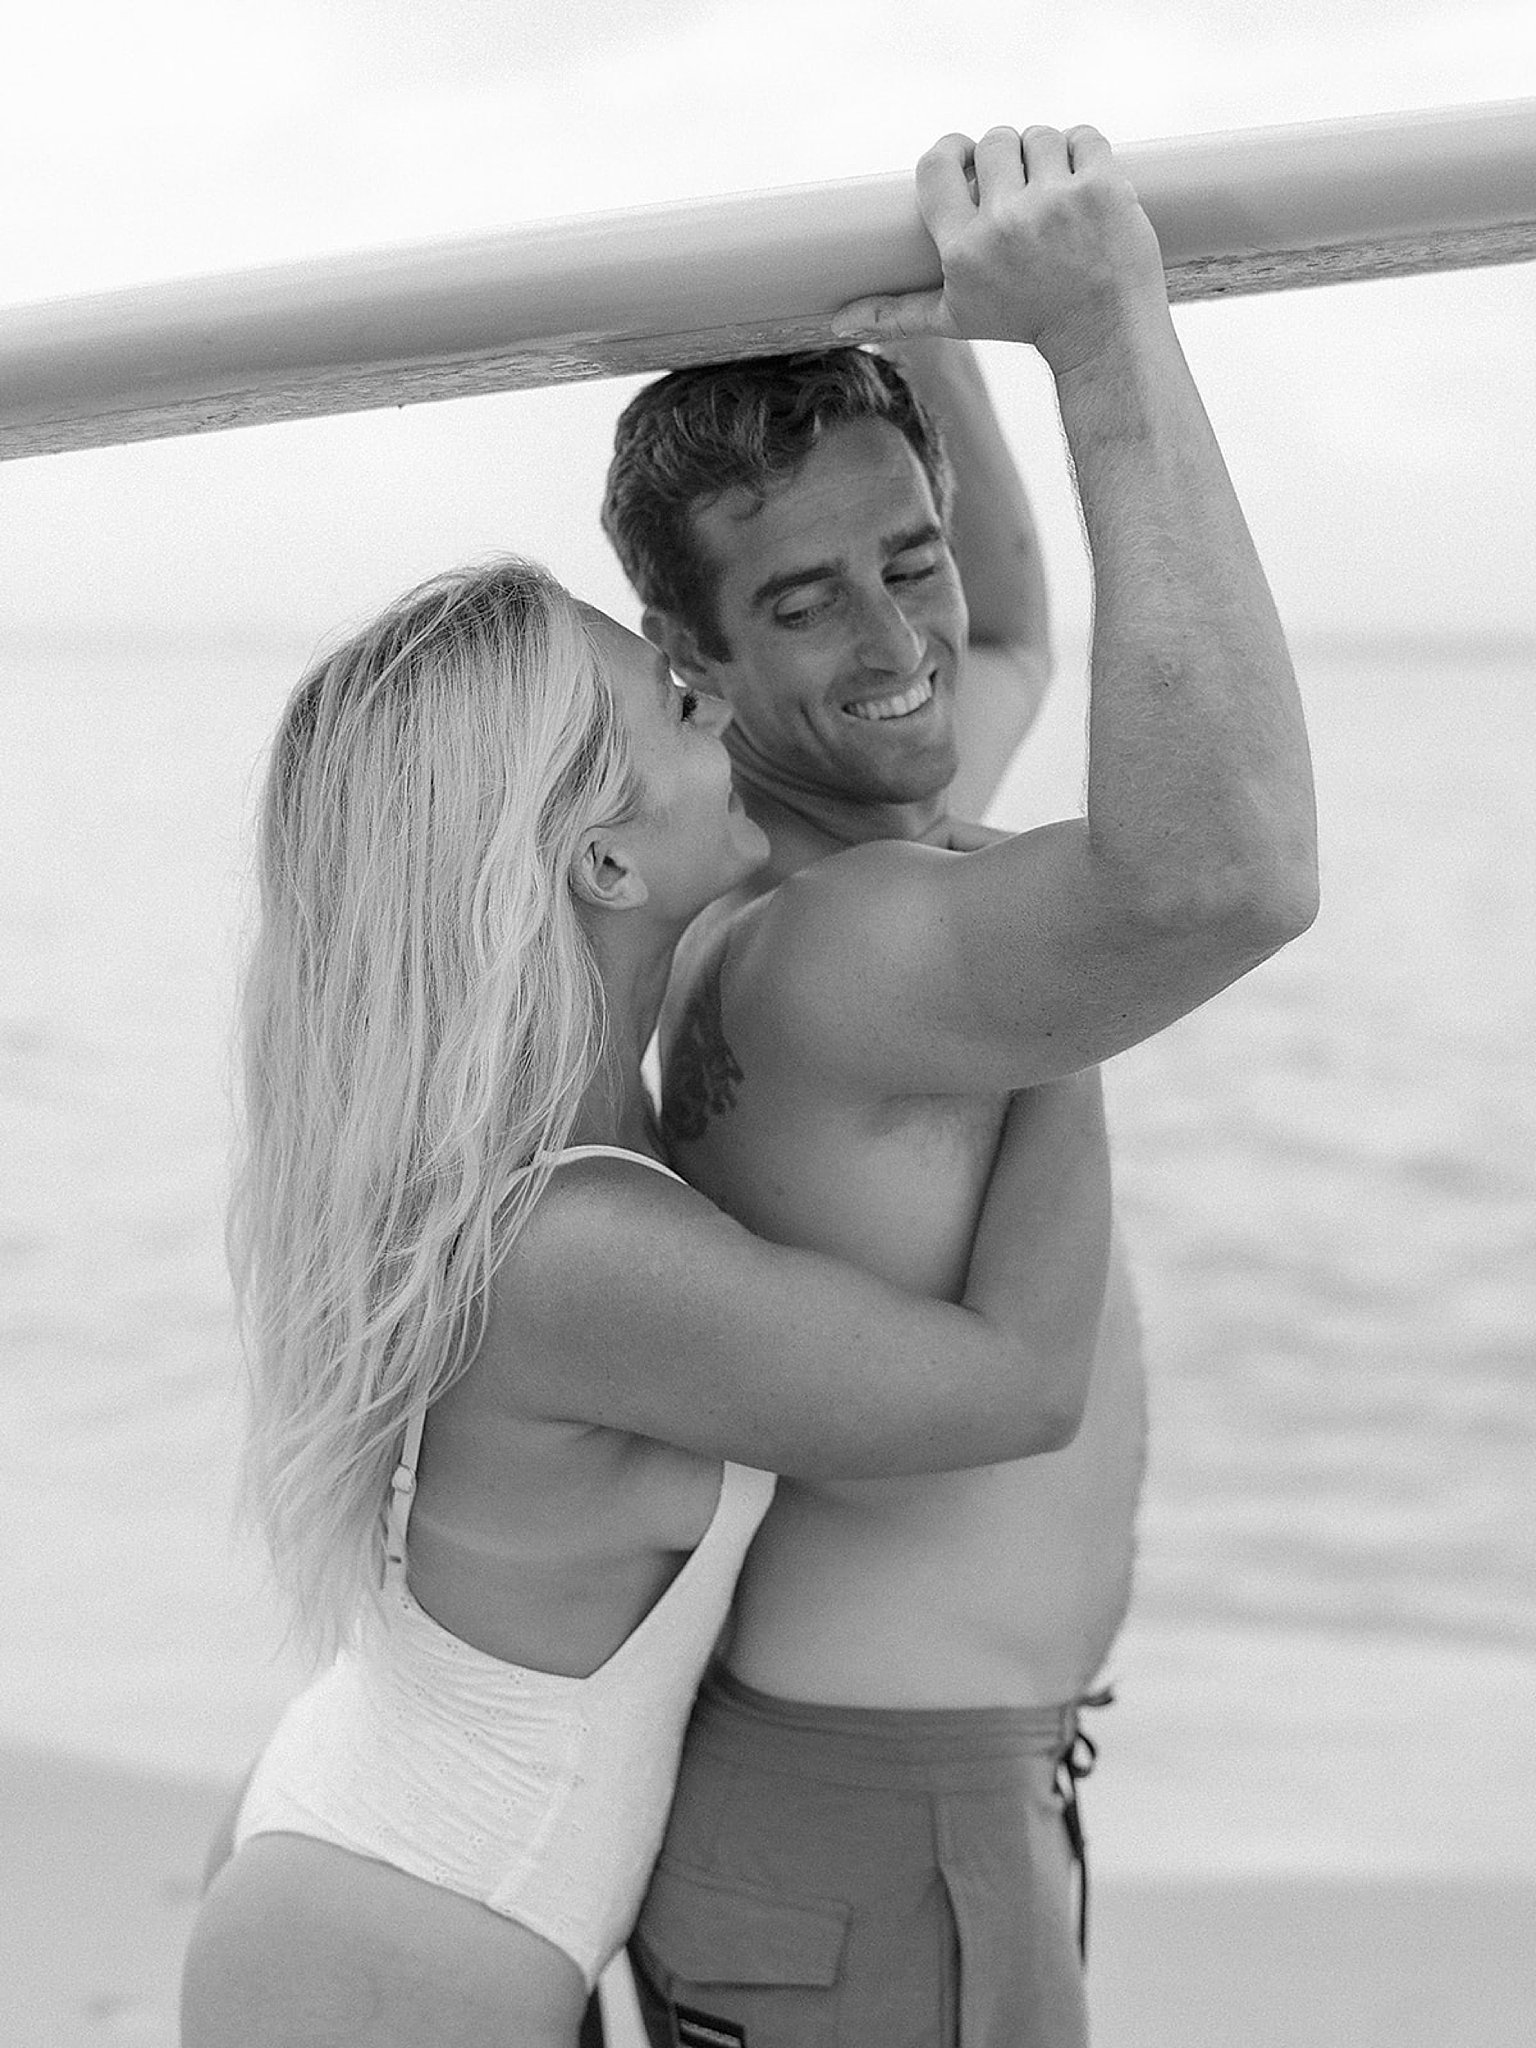 Ocean-City-New-Jersey-Engagement-Photography-by-Magi-Fisher-of-Magdalena-Studios-Karly-Billy-Ocean-City-New-Jersey-Engagement-Photographer 0037